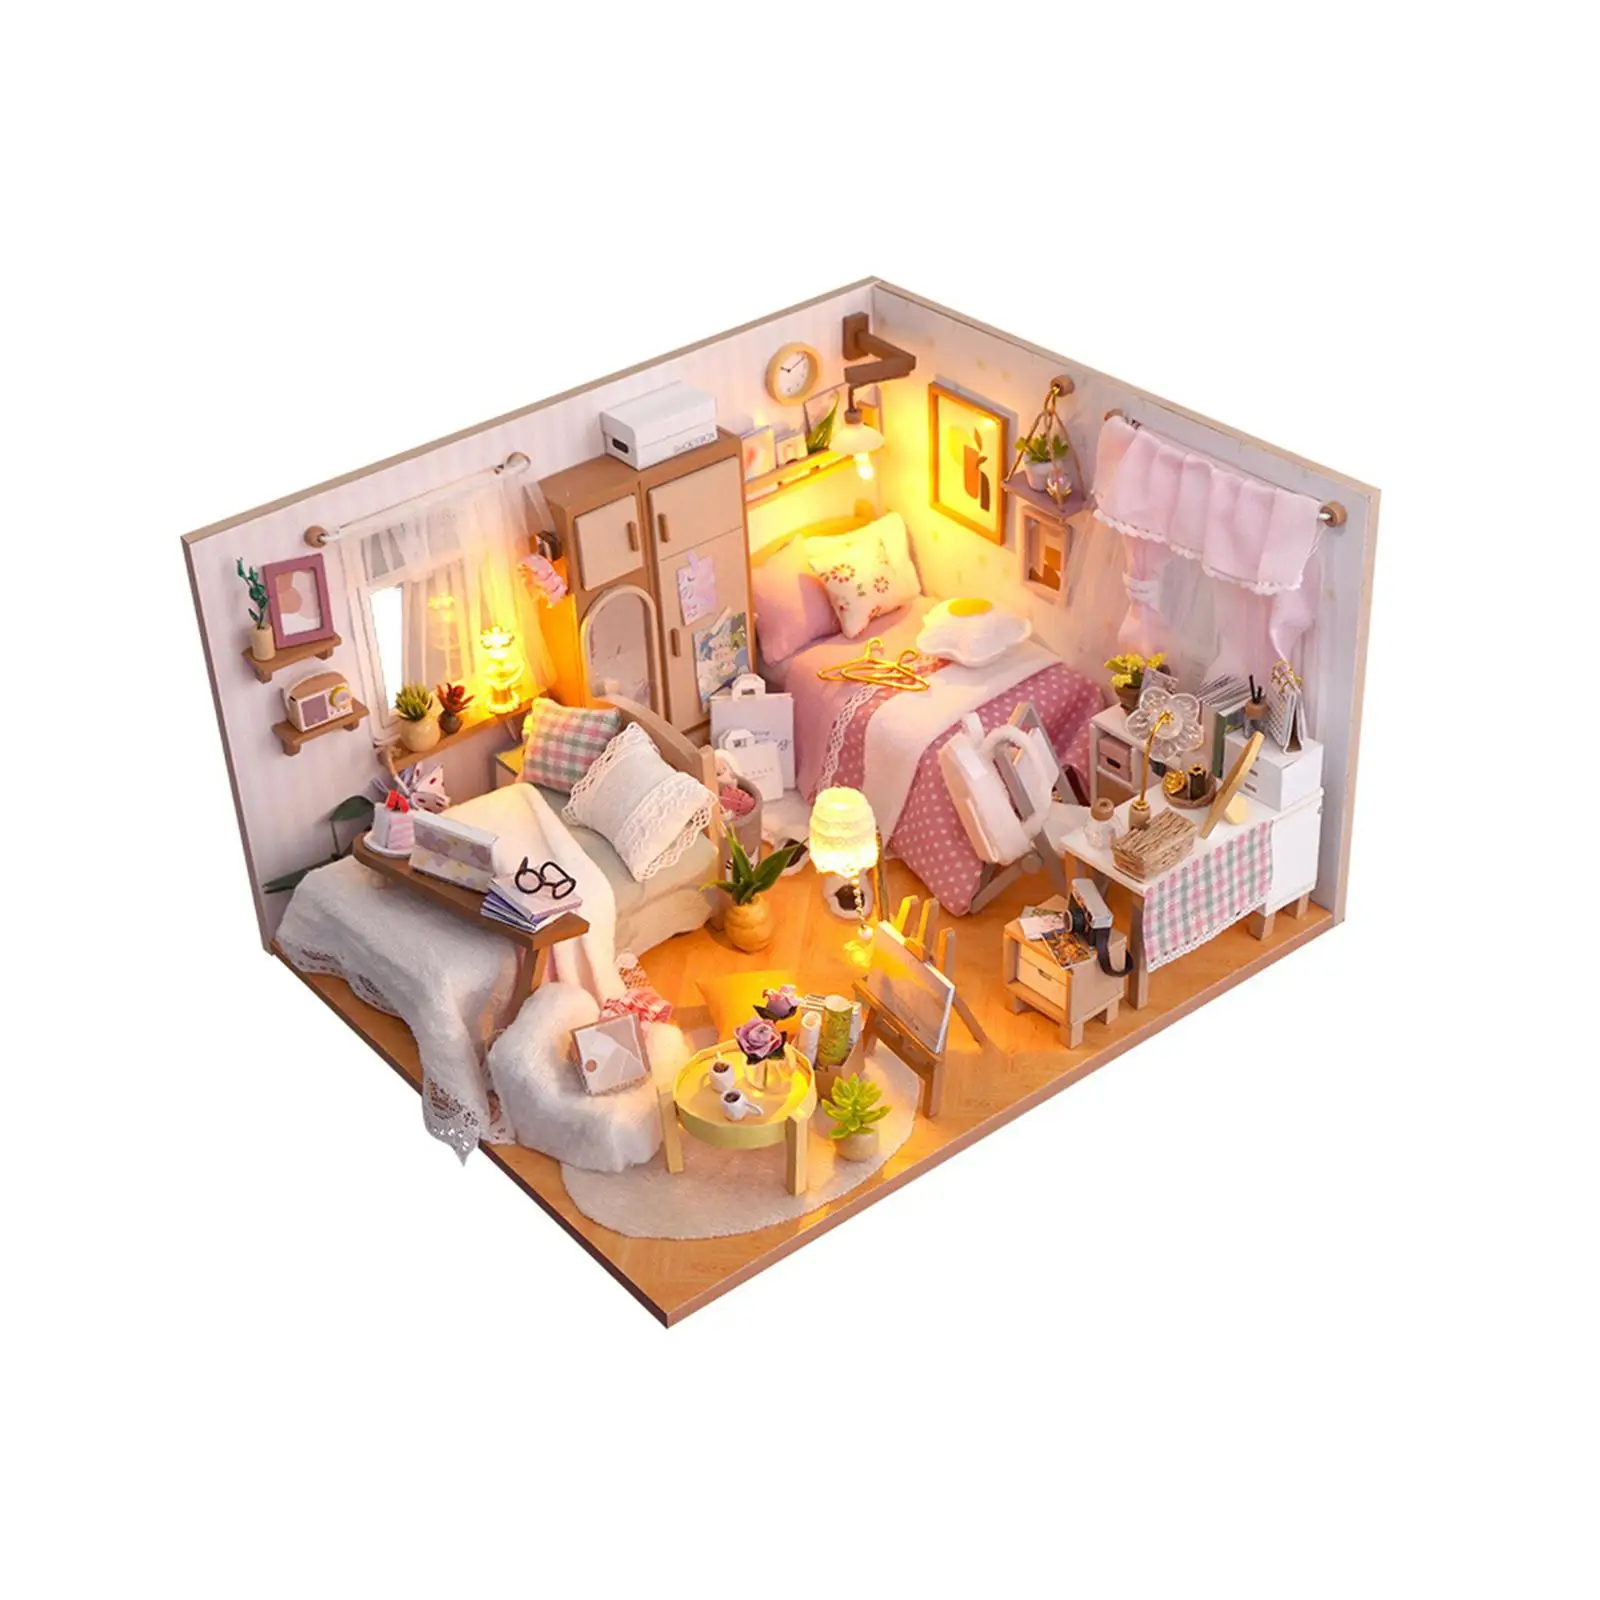 DIY Wooden Miniature Dollhouse Kits Easy to Assemble for Kids Adults Collectibles with Lights Educational Toy Modern Room Box